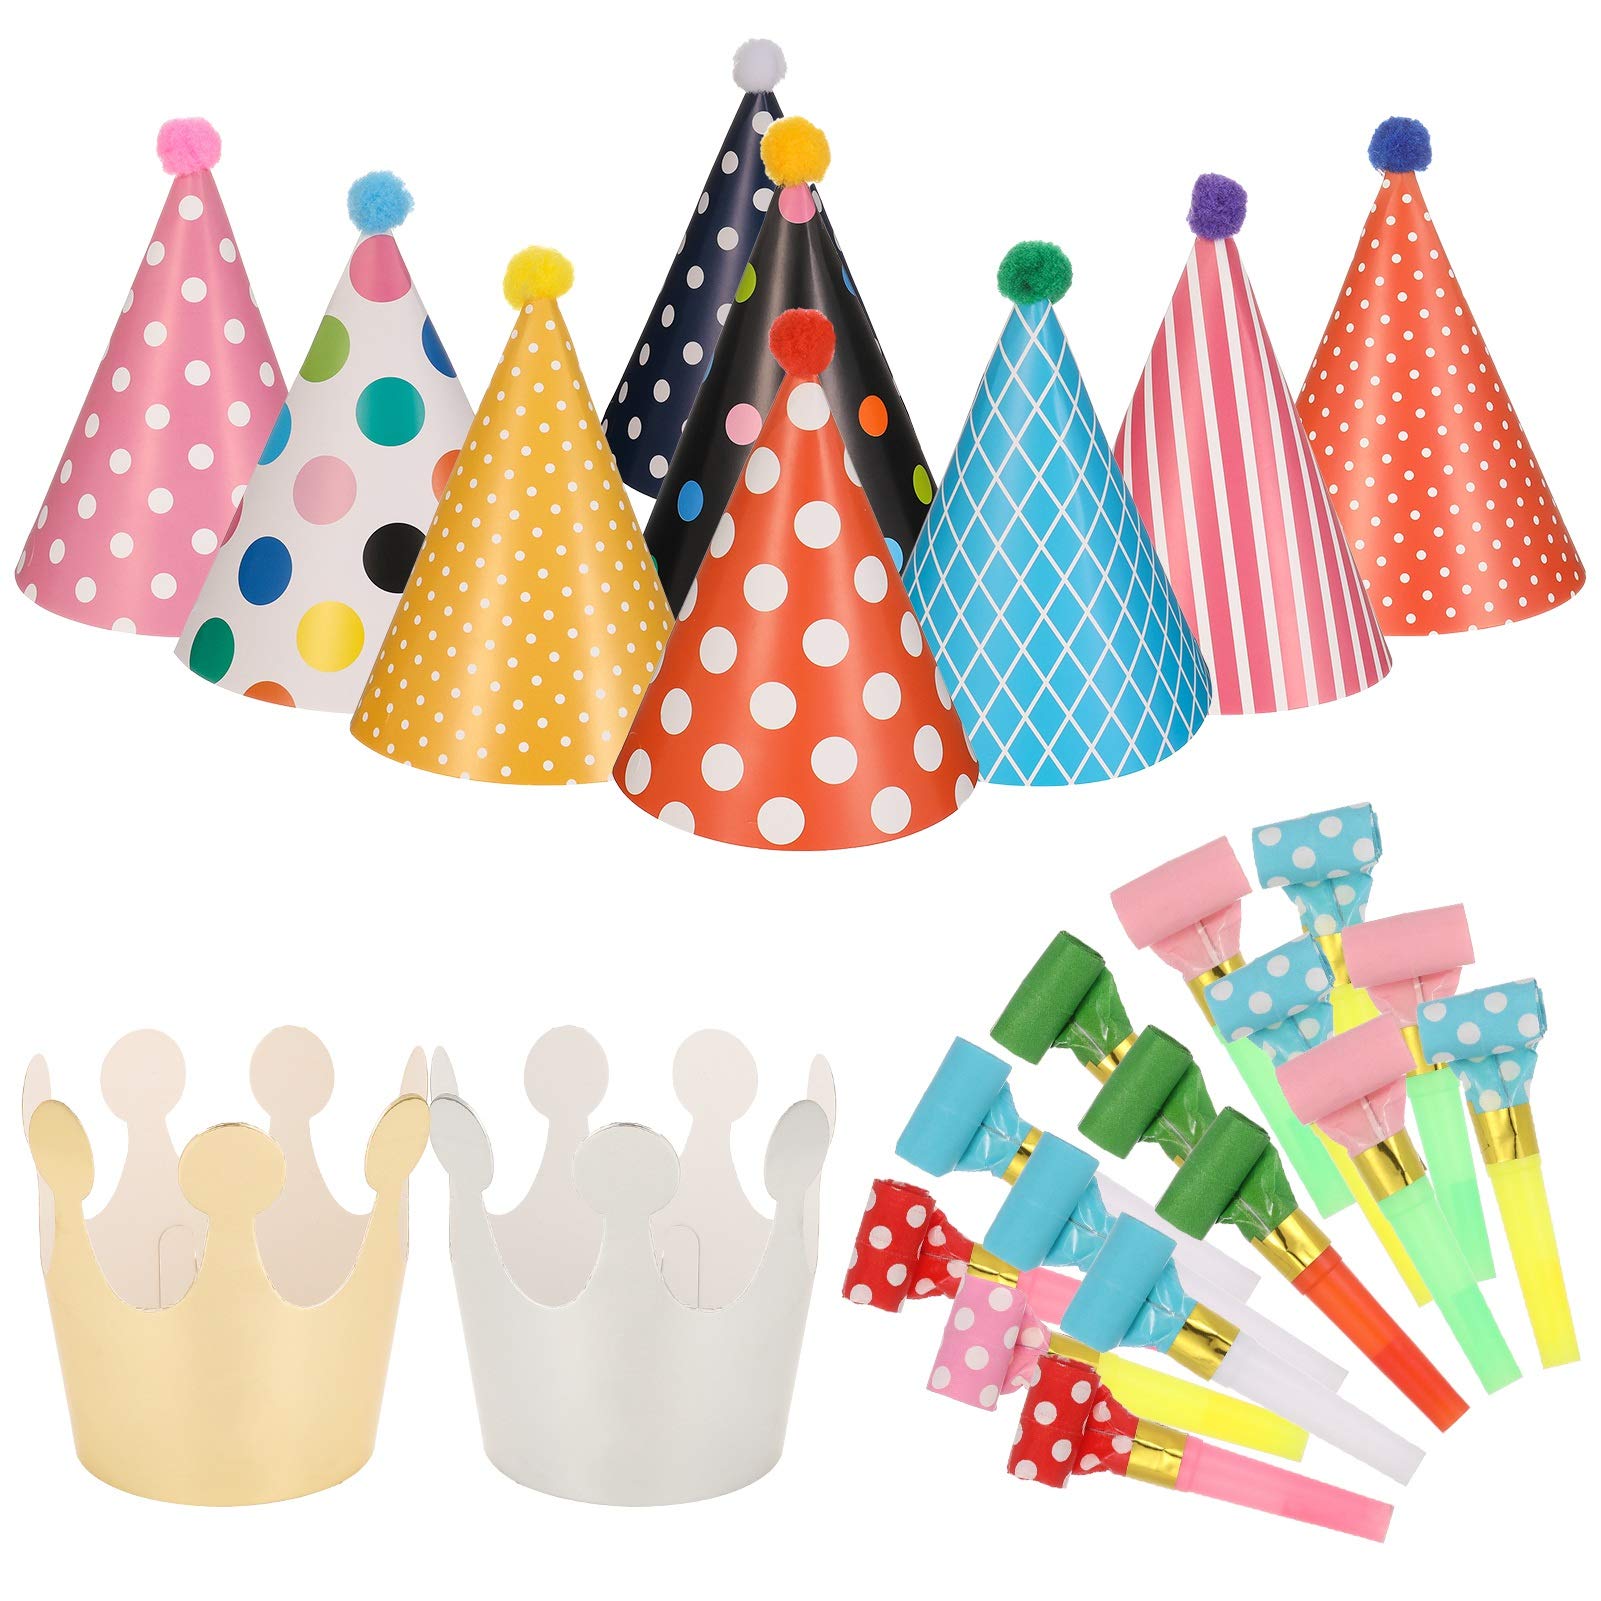 BUBABOX 11 Pcs Birthday Party Hat with Pom Poms for Adults, Party Cone Hat  and Whistles, 15 Pcs Party Noise Maker Blowouts for Kids, Mini Paper Party  Hat and Blowouts Set for